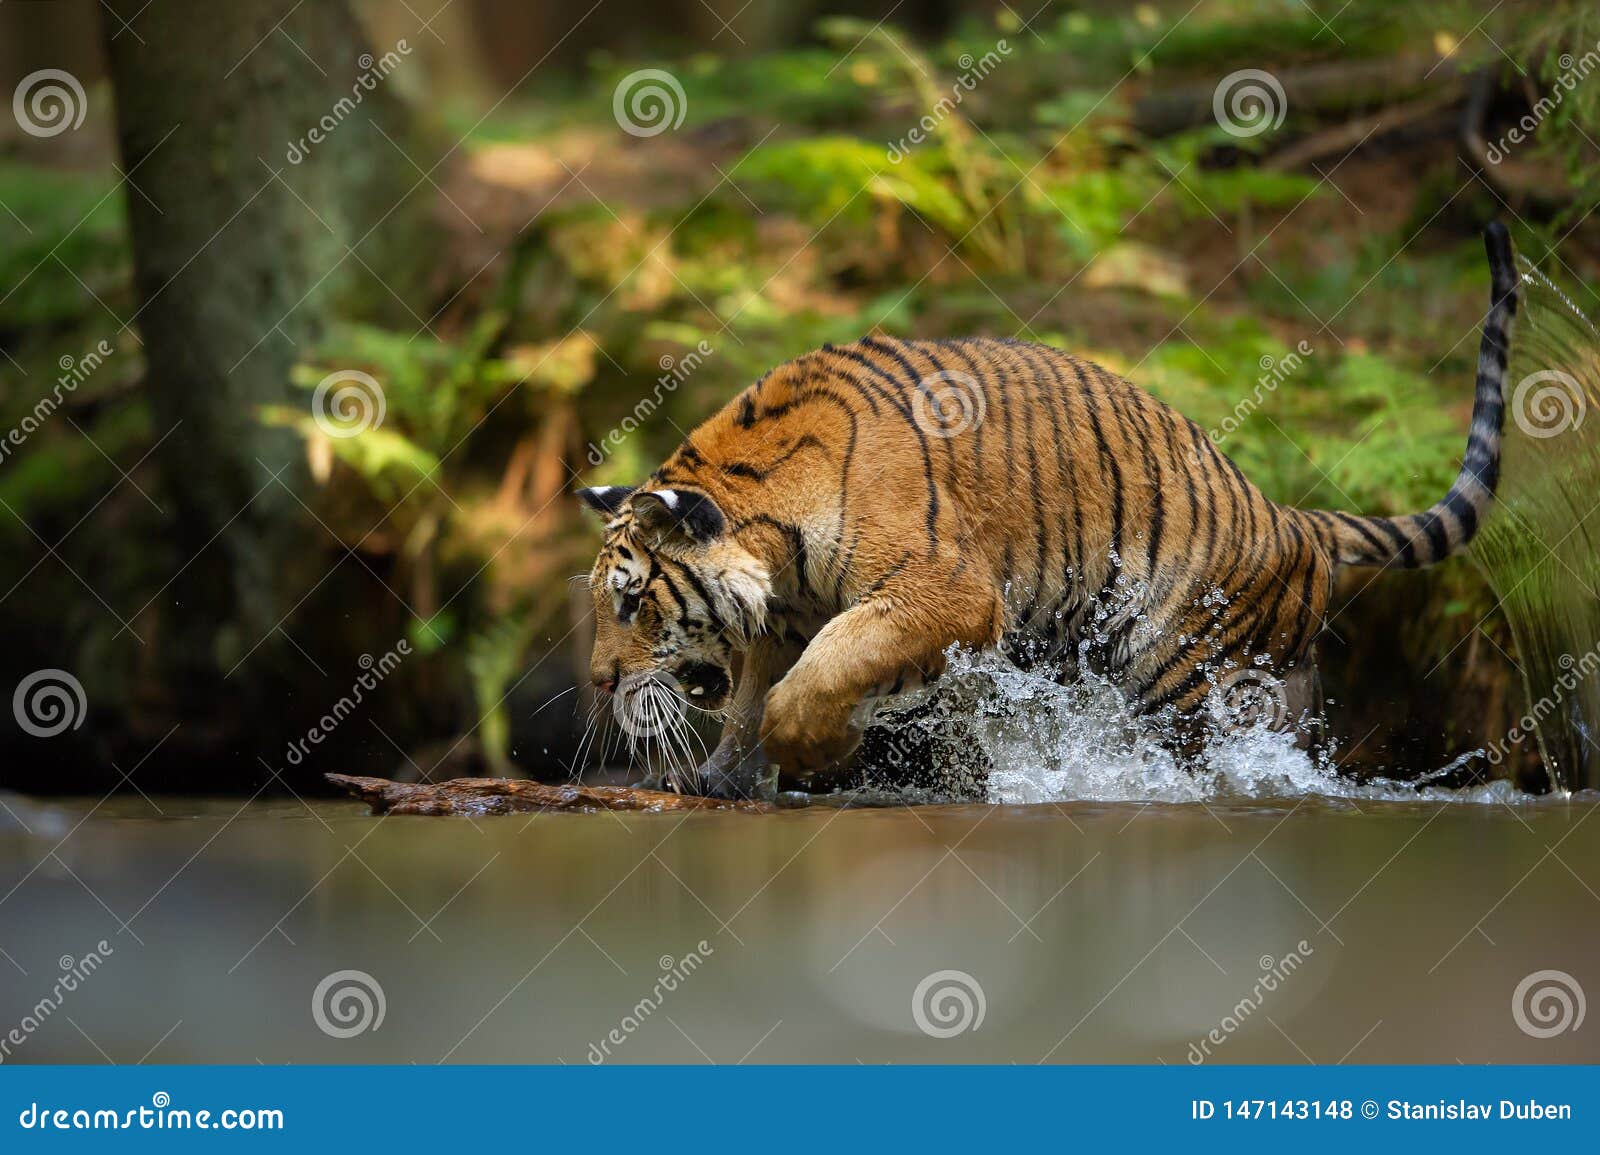 Siberian Tiger in Forest River with Splashing Water. Agressive Animal in  Natural Habitat. Panthera Tigris Altaica Stock Photo - Image of head,  closeup: 147143148